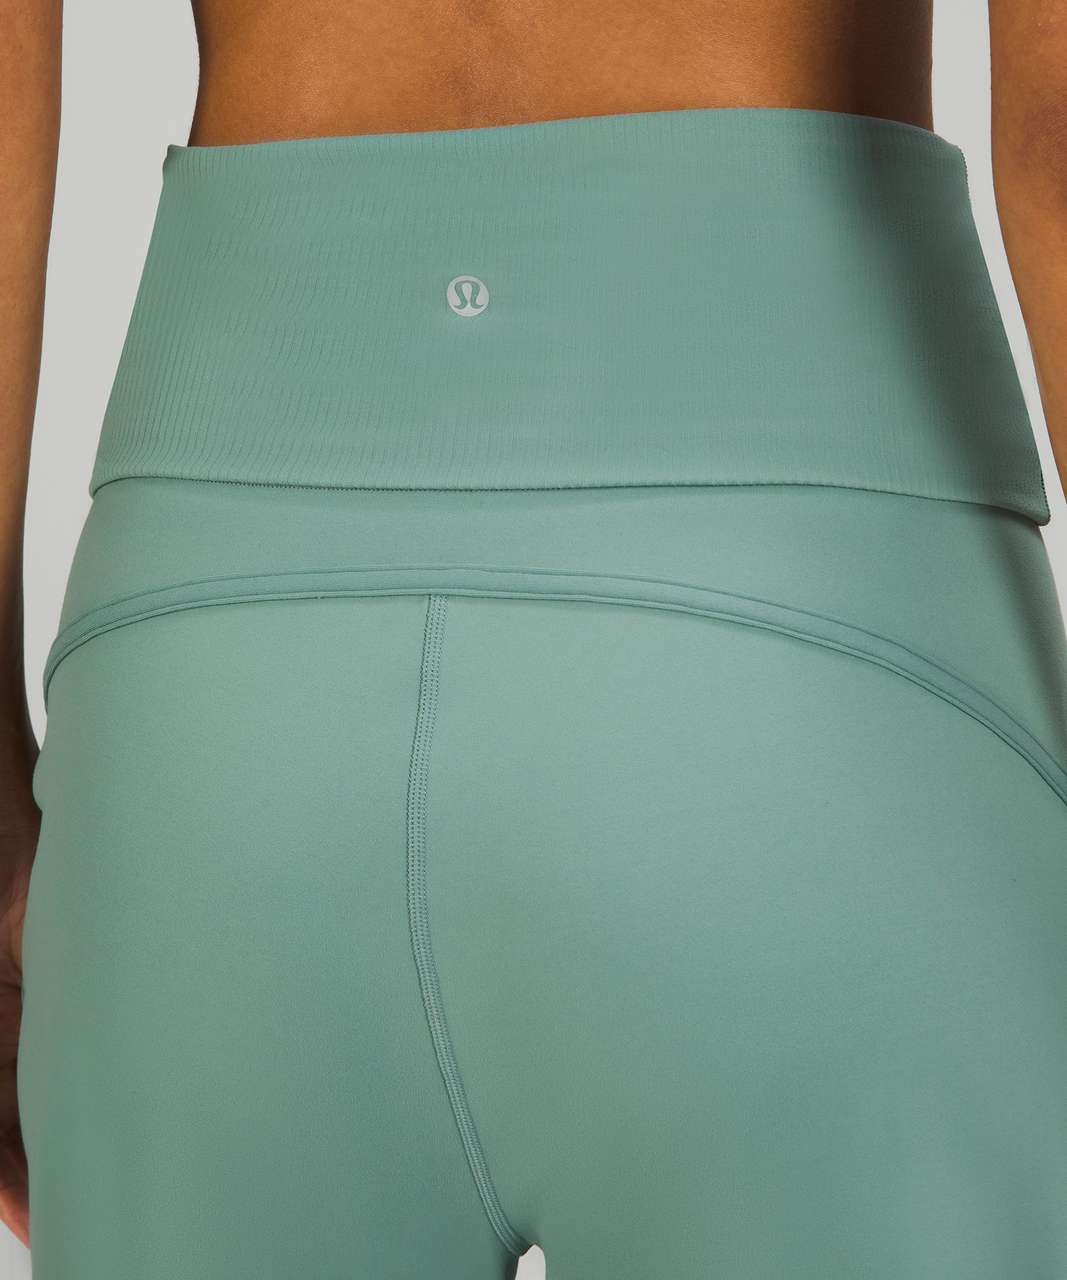 BNWT Lululemon Align High Rise Pant with Pockets 25 Tidewater Teal (Size  6), Women's Fashion, Activewear on Carousell